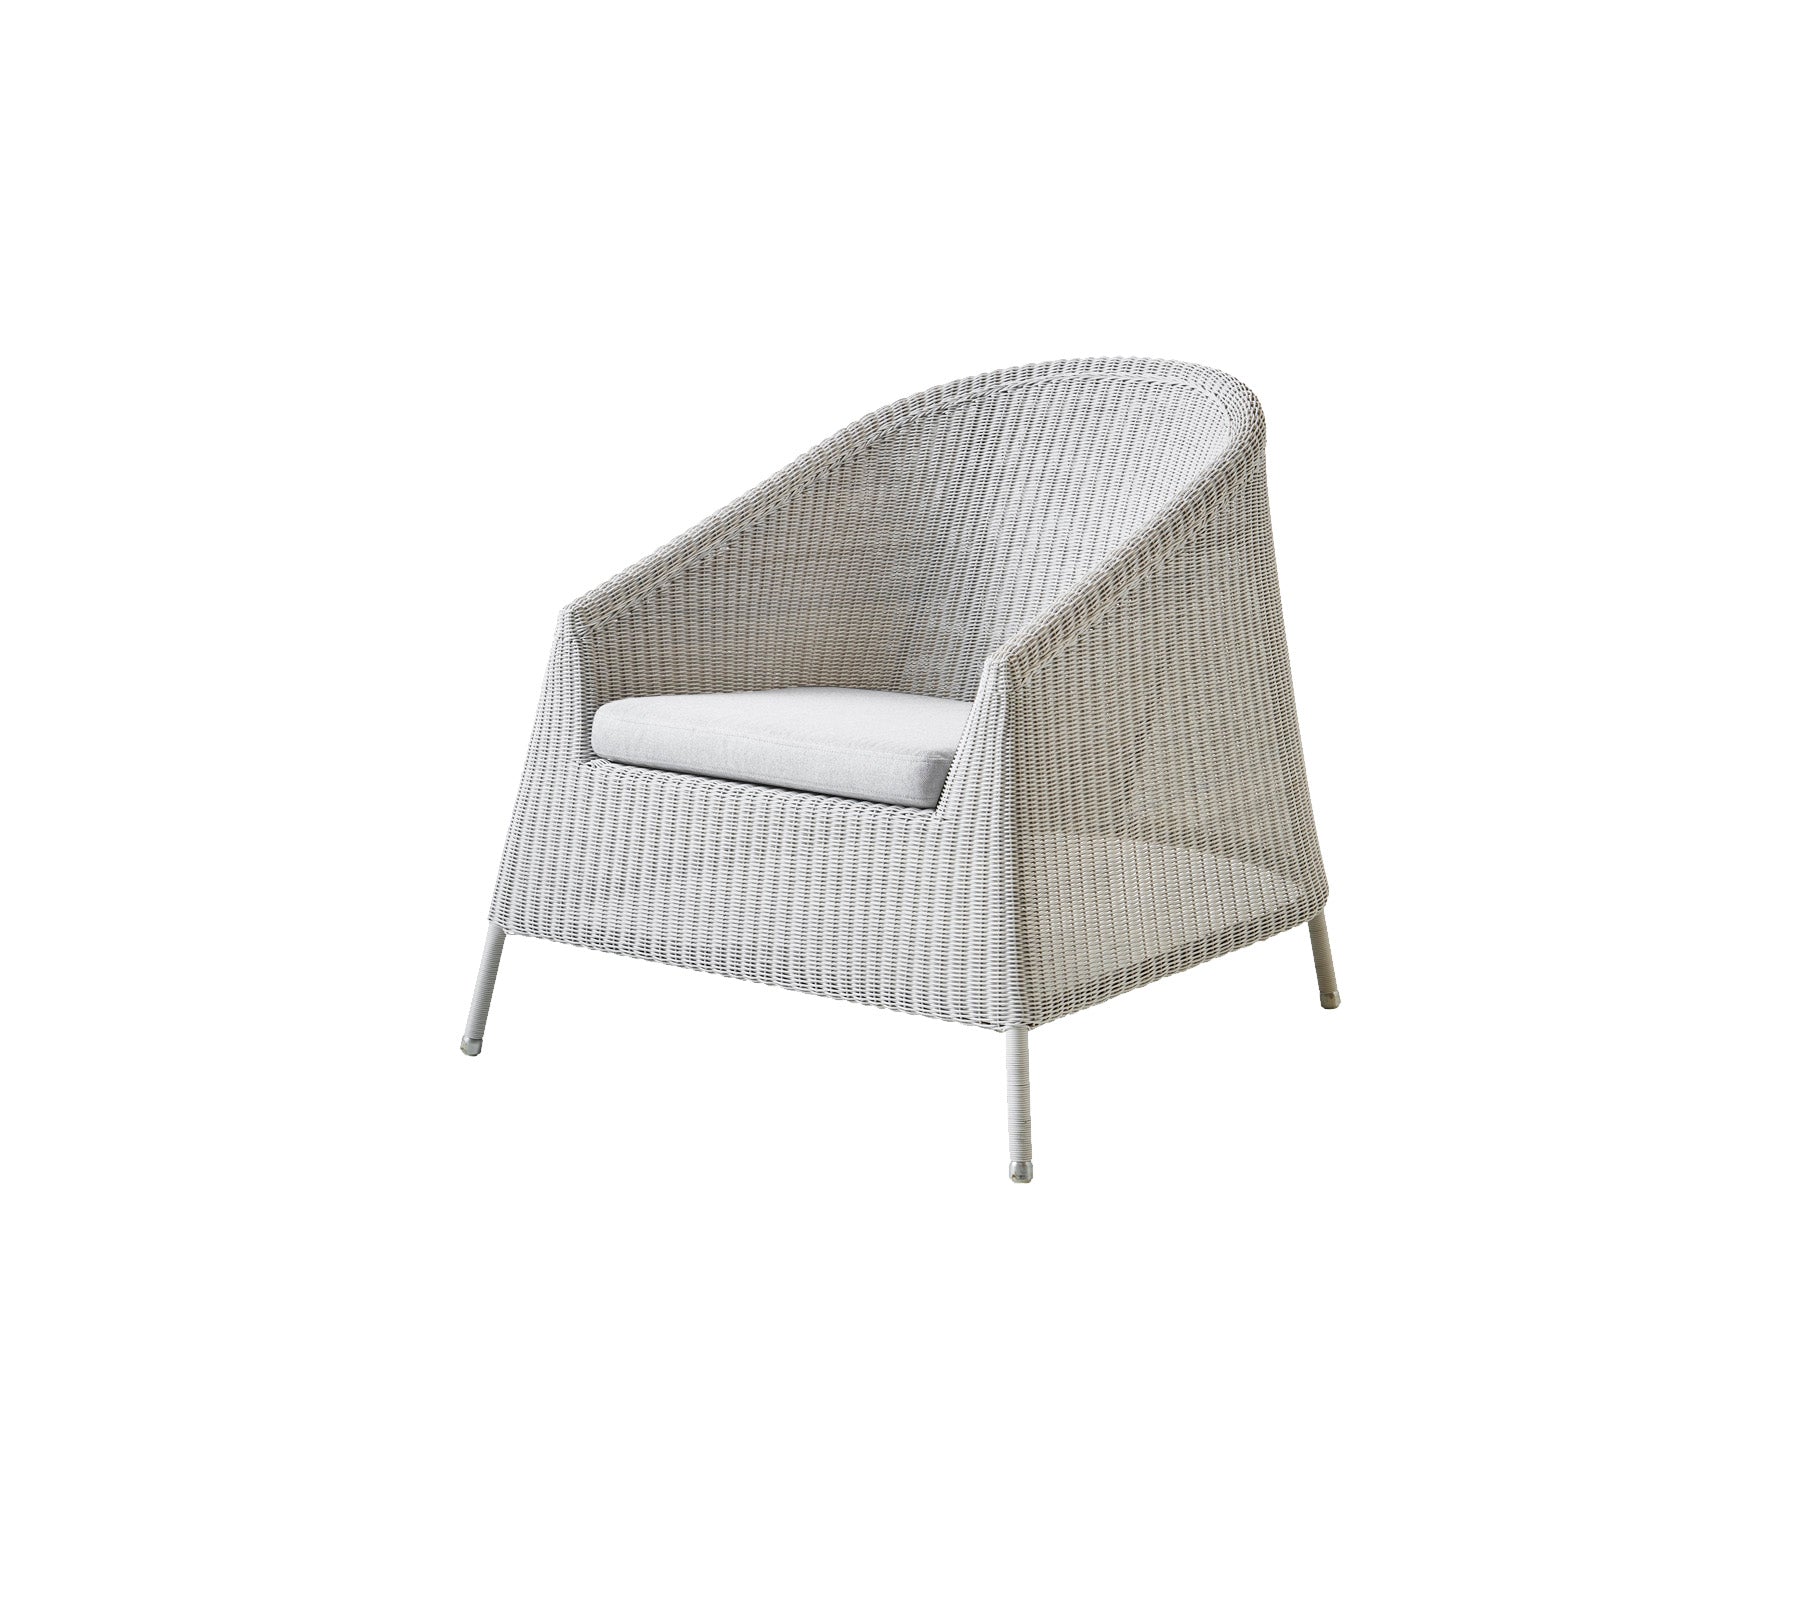 Cane-Line - Kingston lounge chair, stackable - Galvanized steel  | 5450